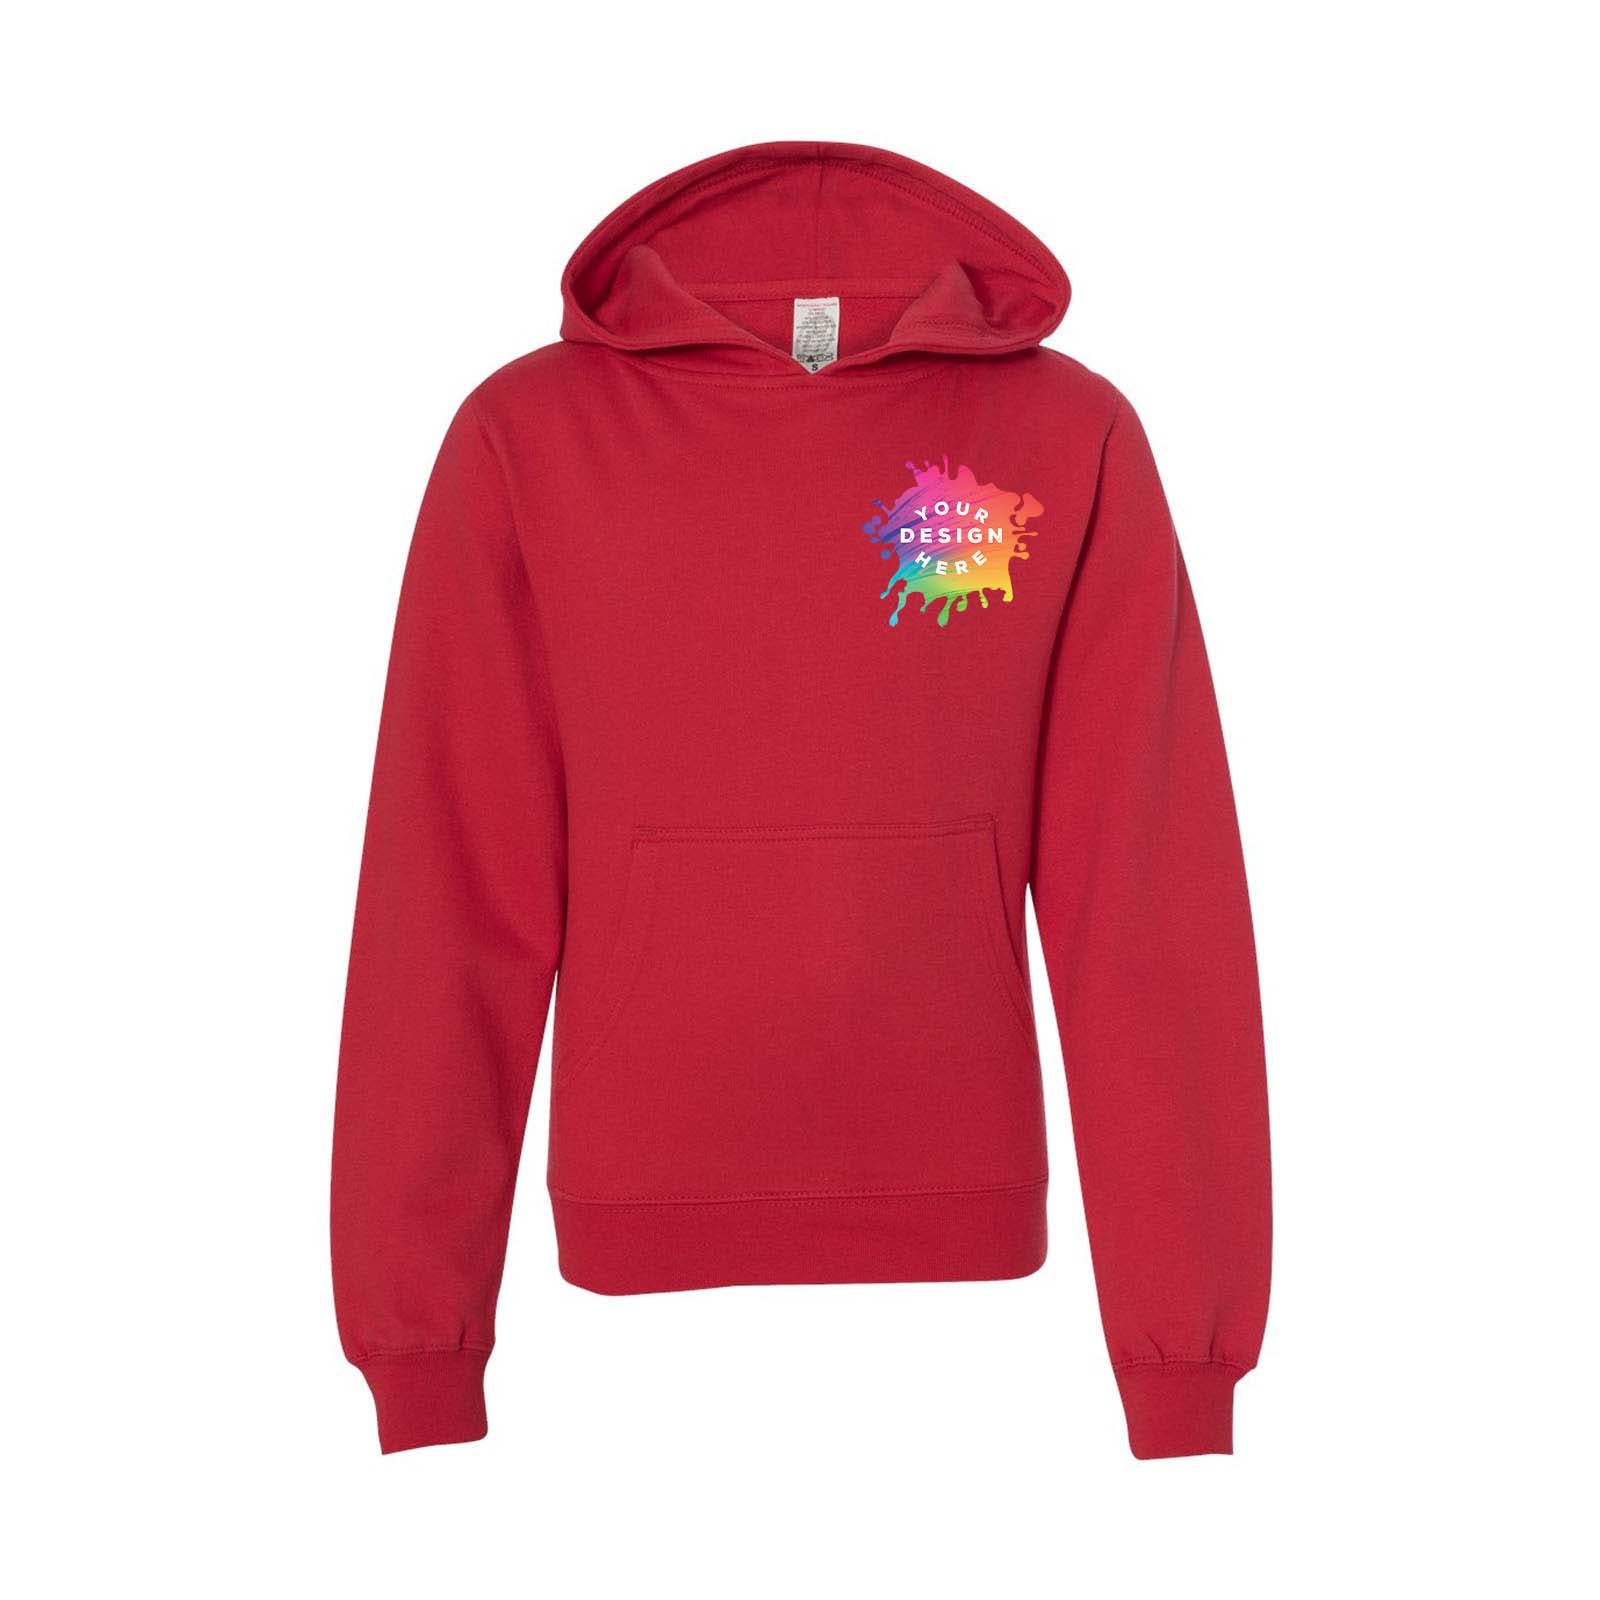 Independent Trading Co. Youth Midweight Hooded Sweatshirt - Mato & Hash